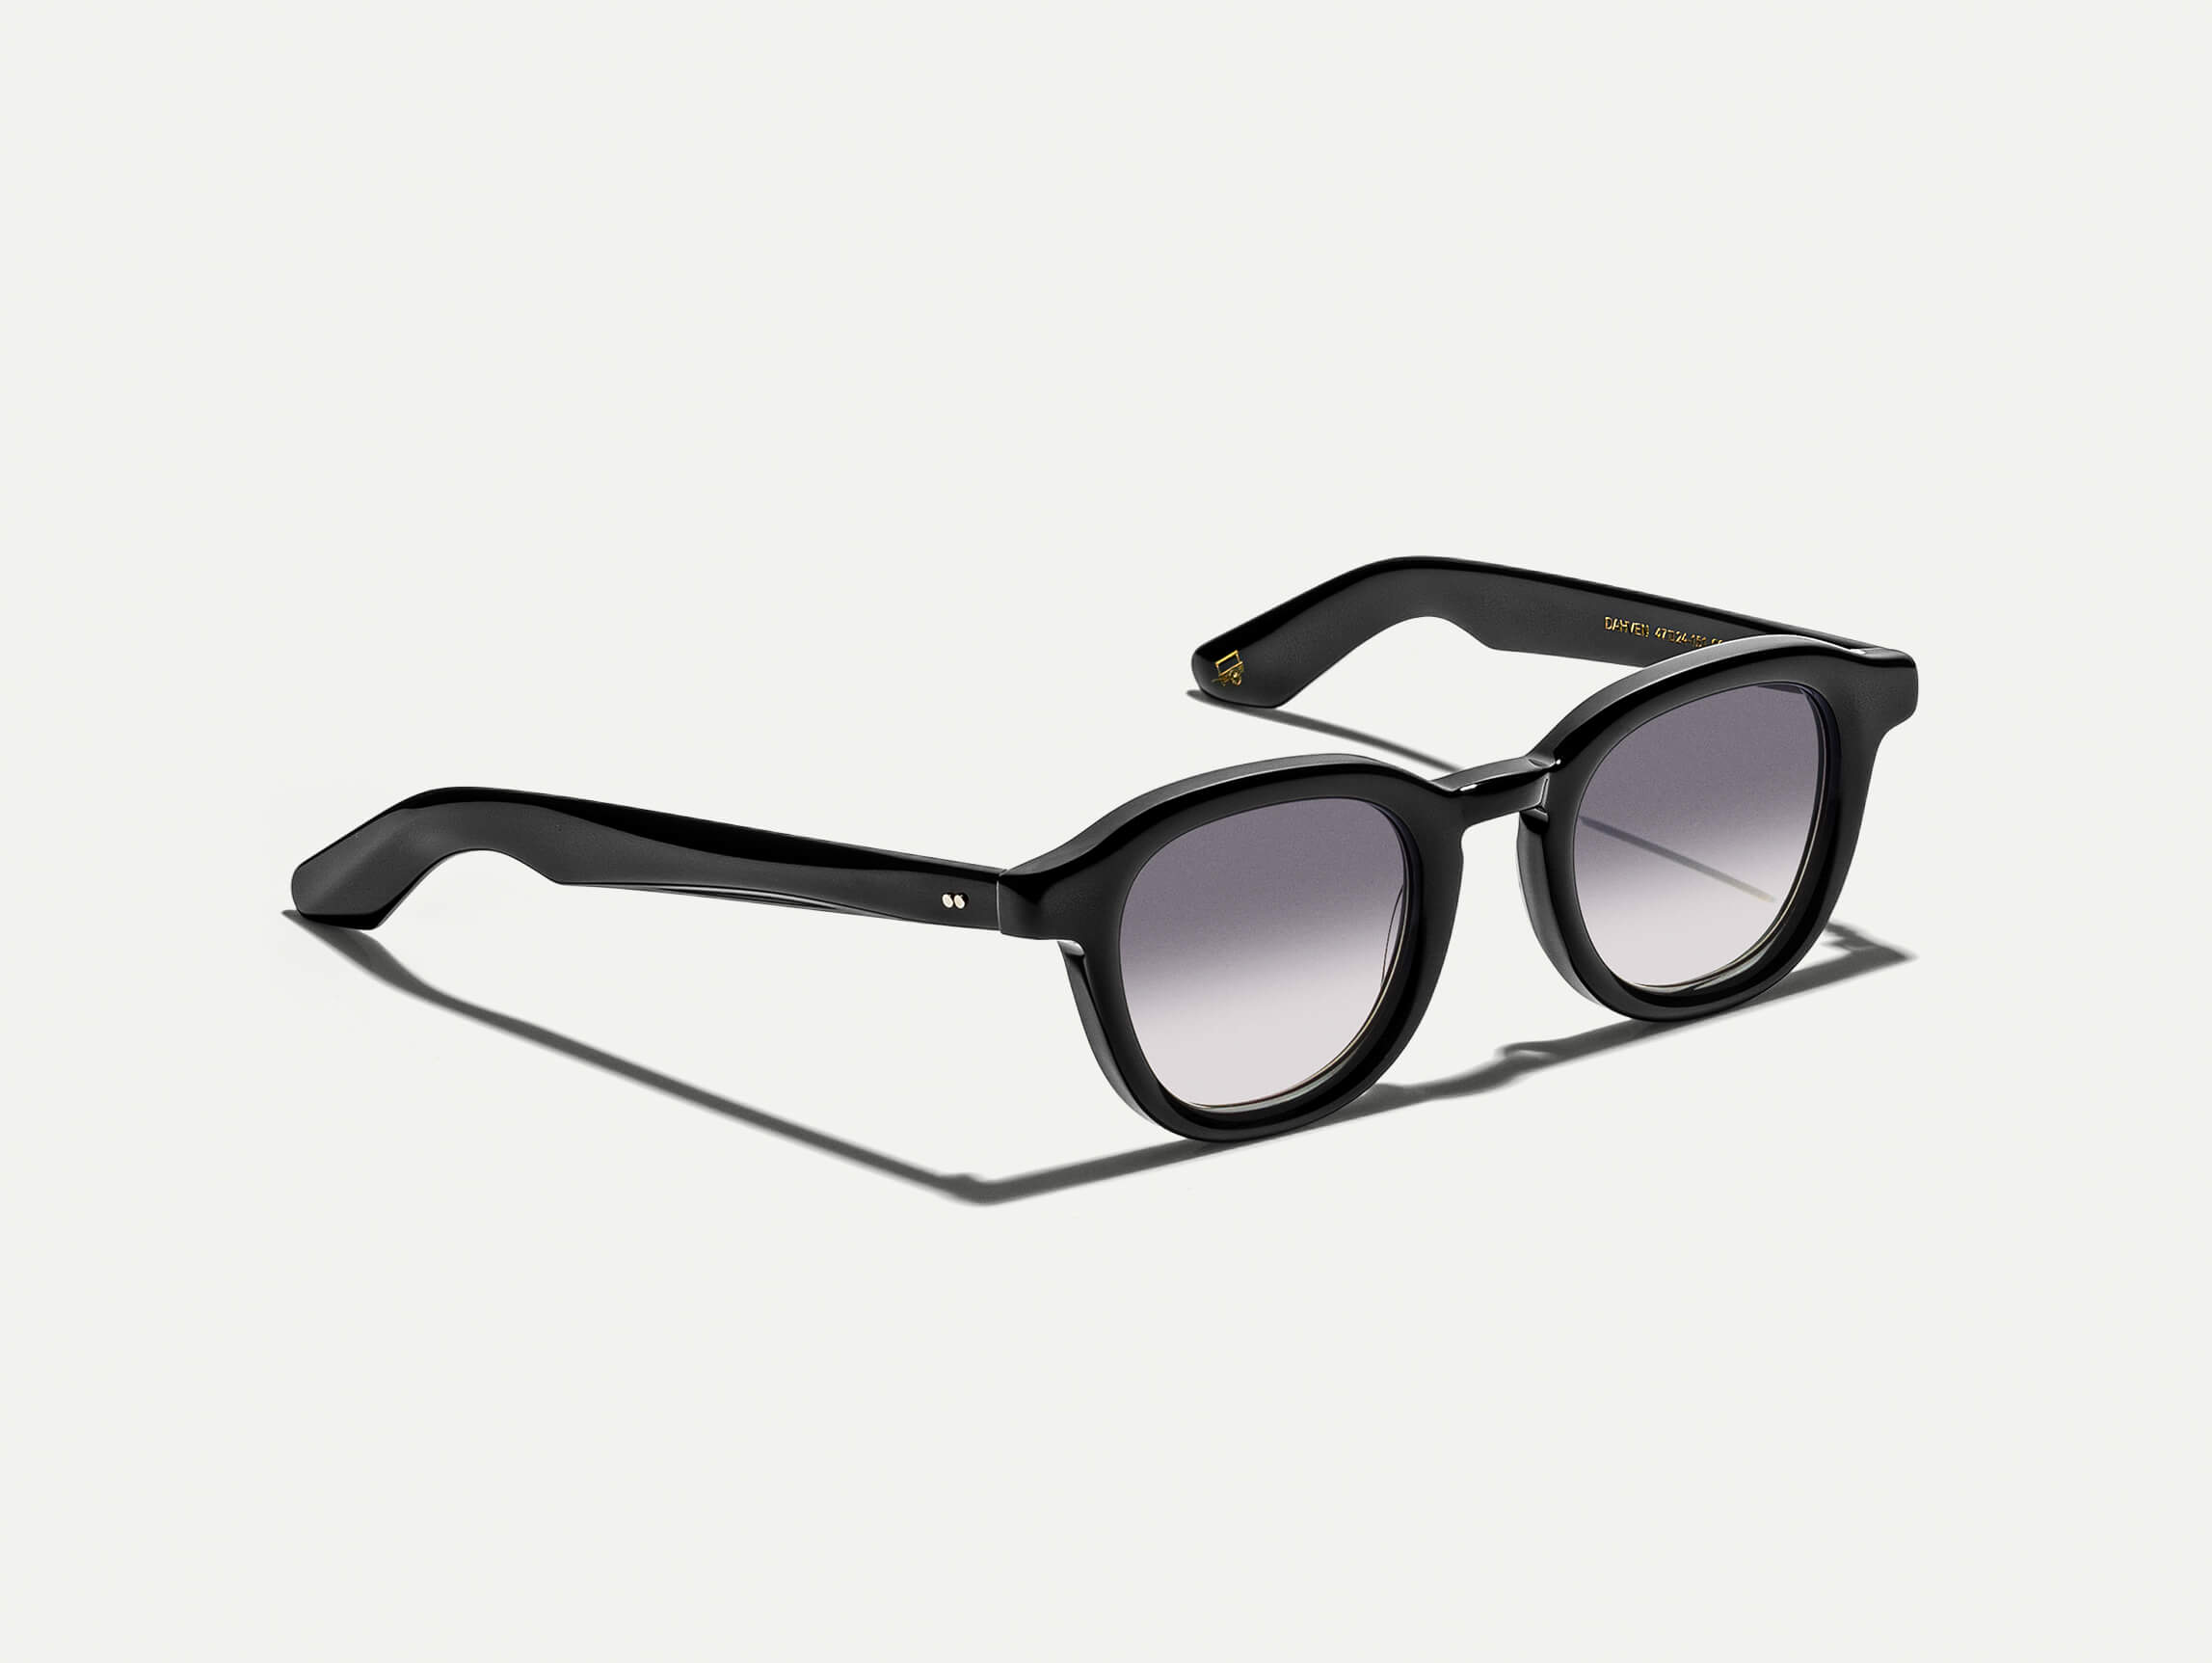 The DAHVEN Black with American Grey Fade Tinted Lenses